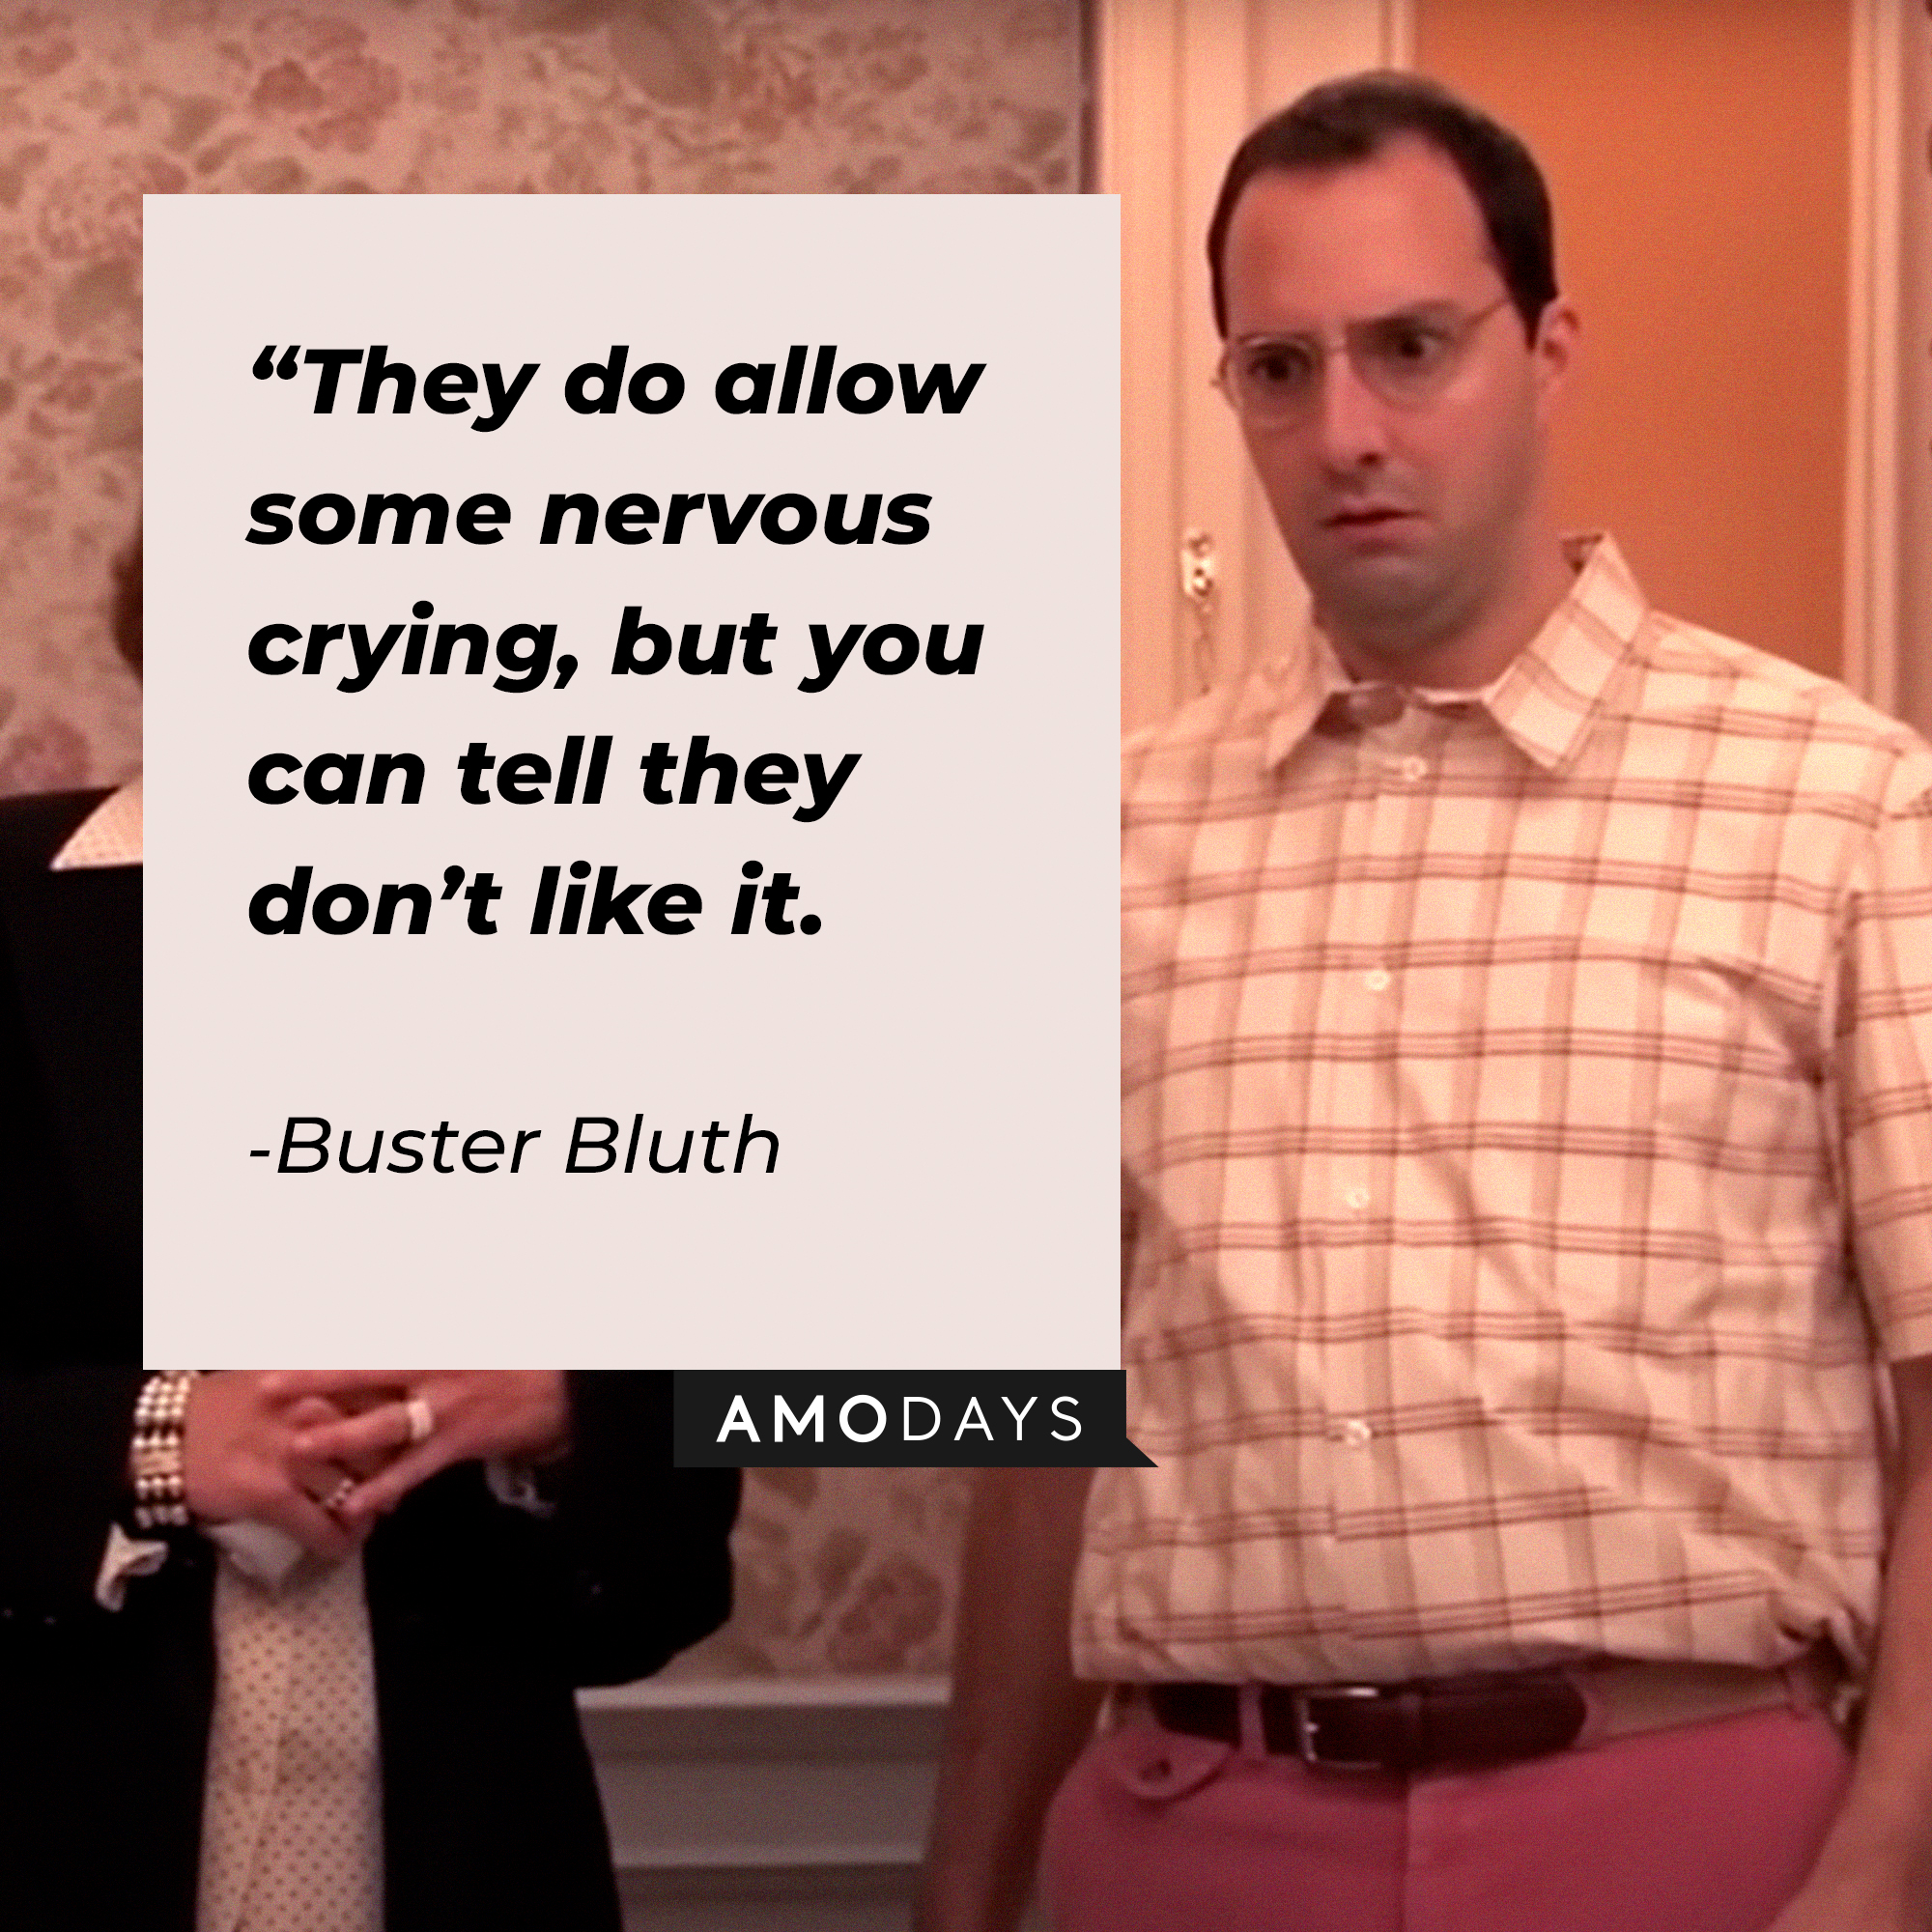 Buster Bluth, with his quote: “They do allow some nervous crying, but you can tell they don’t like it.” | Source: youtube.com/arresteddev